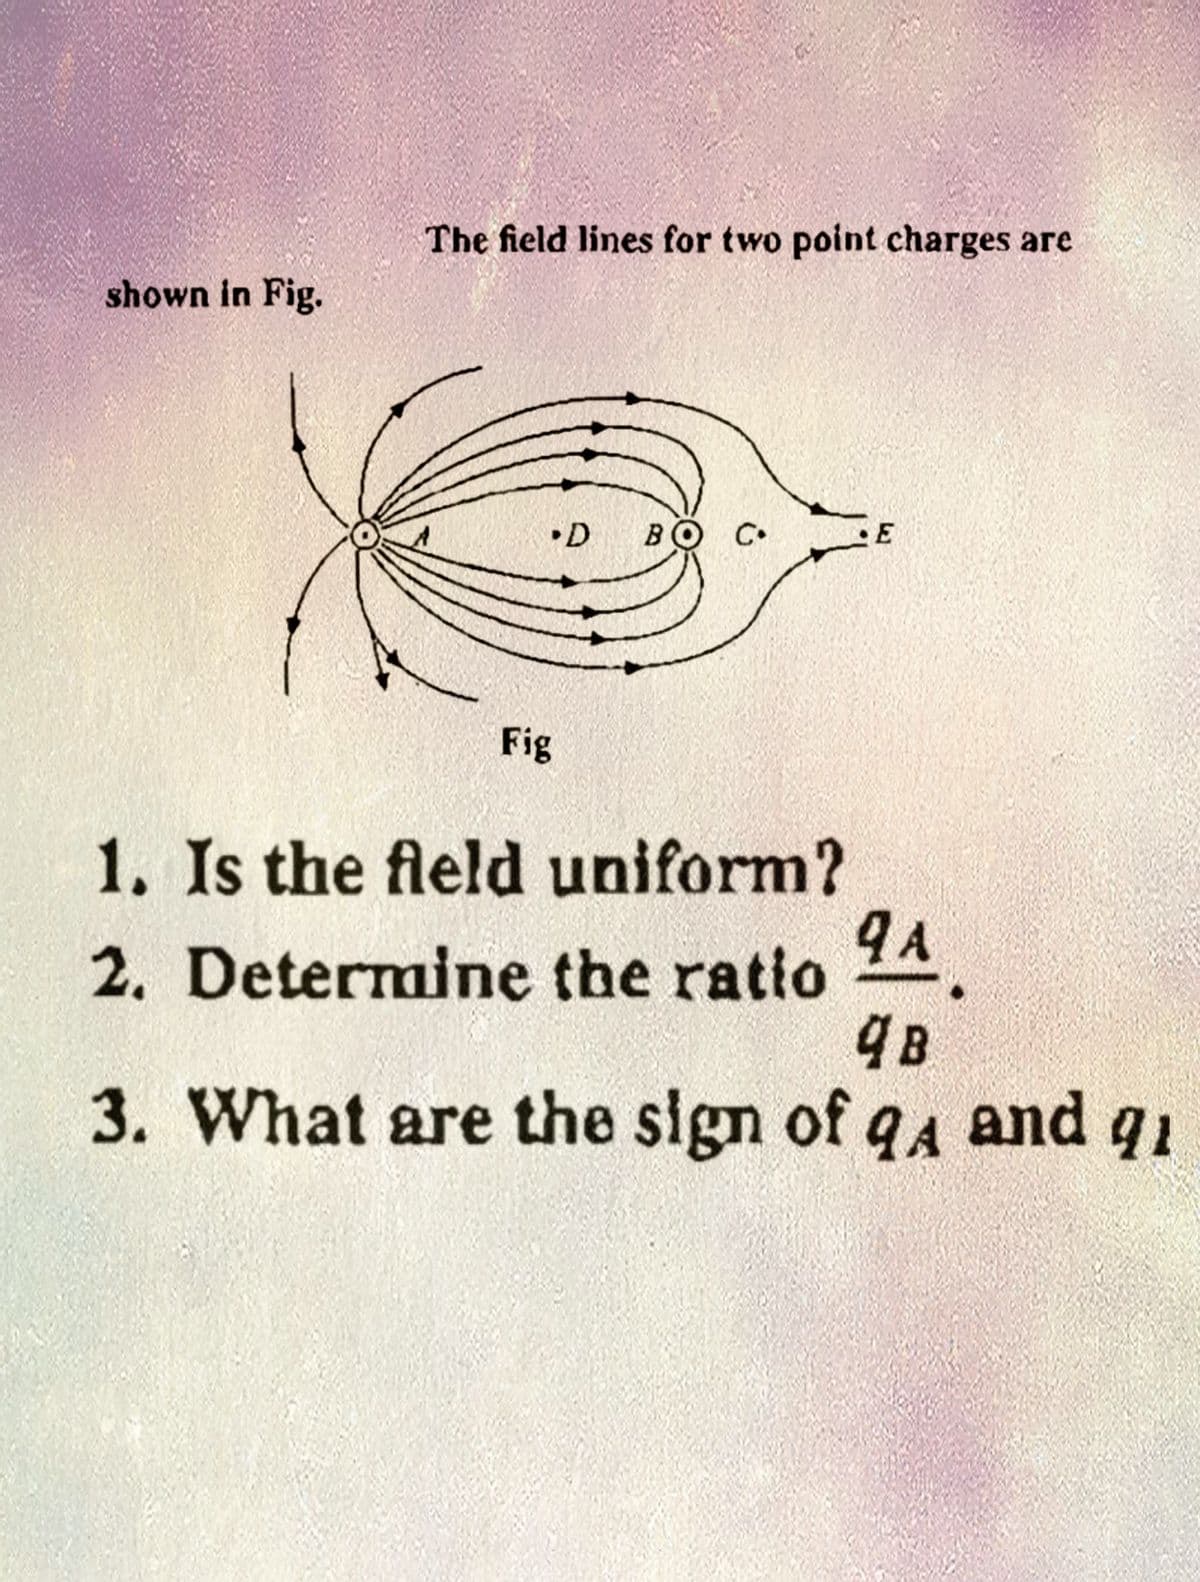 shown in Fig.
The field lines for two point charges are
.D BO
Fig
C
1. Is the field uniform?
2. Determine the ratio
9 A
4
48
3. What are the sign of q4 and qi
A